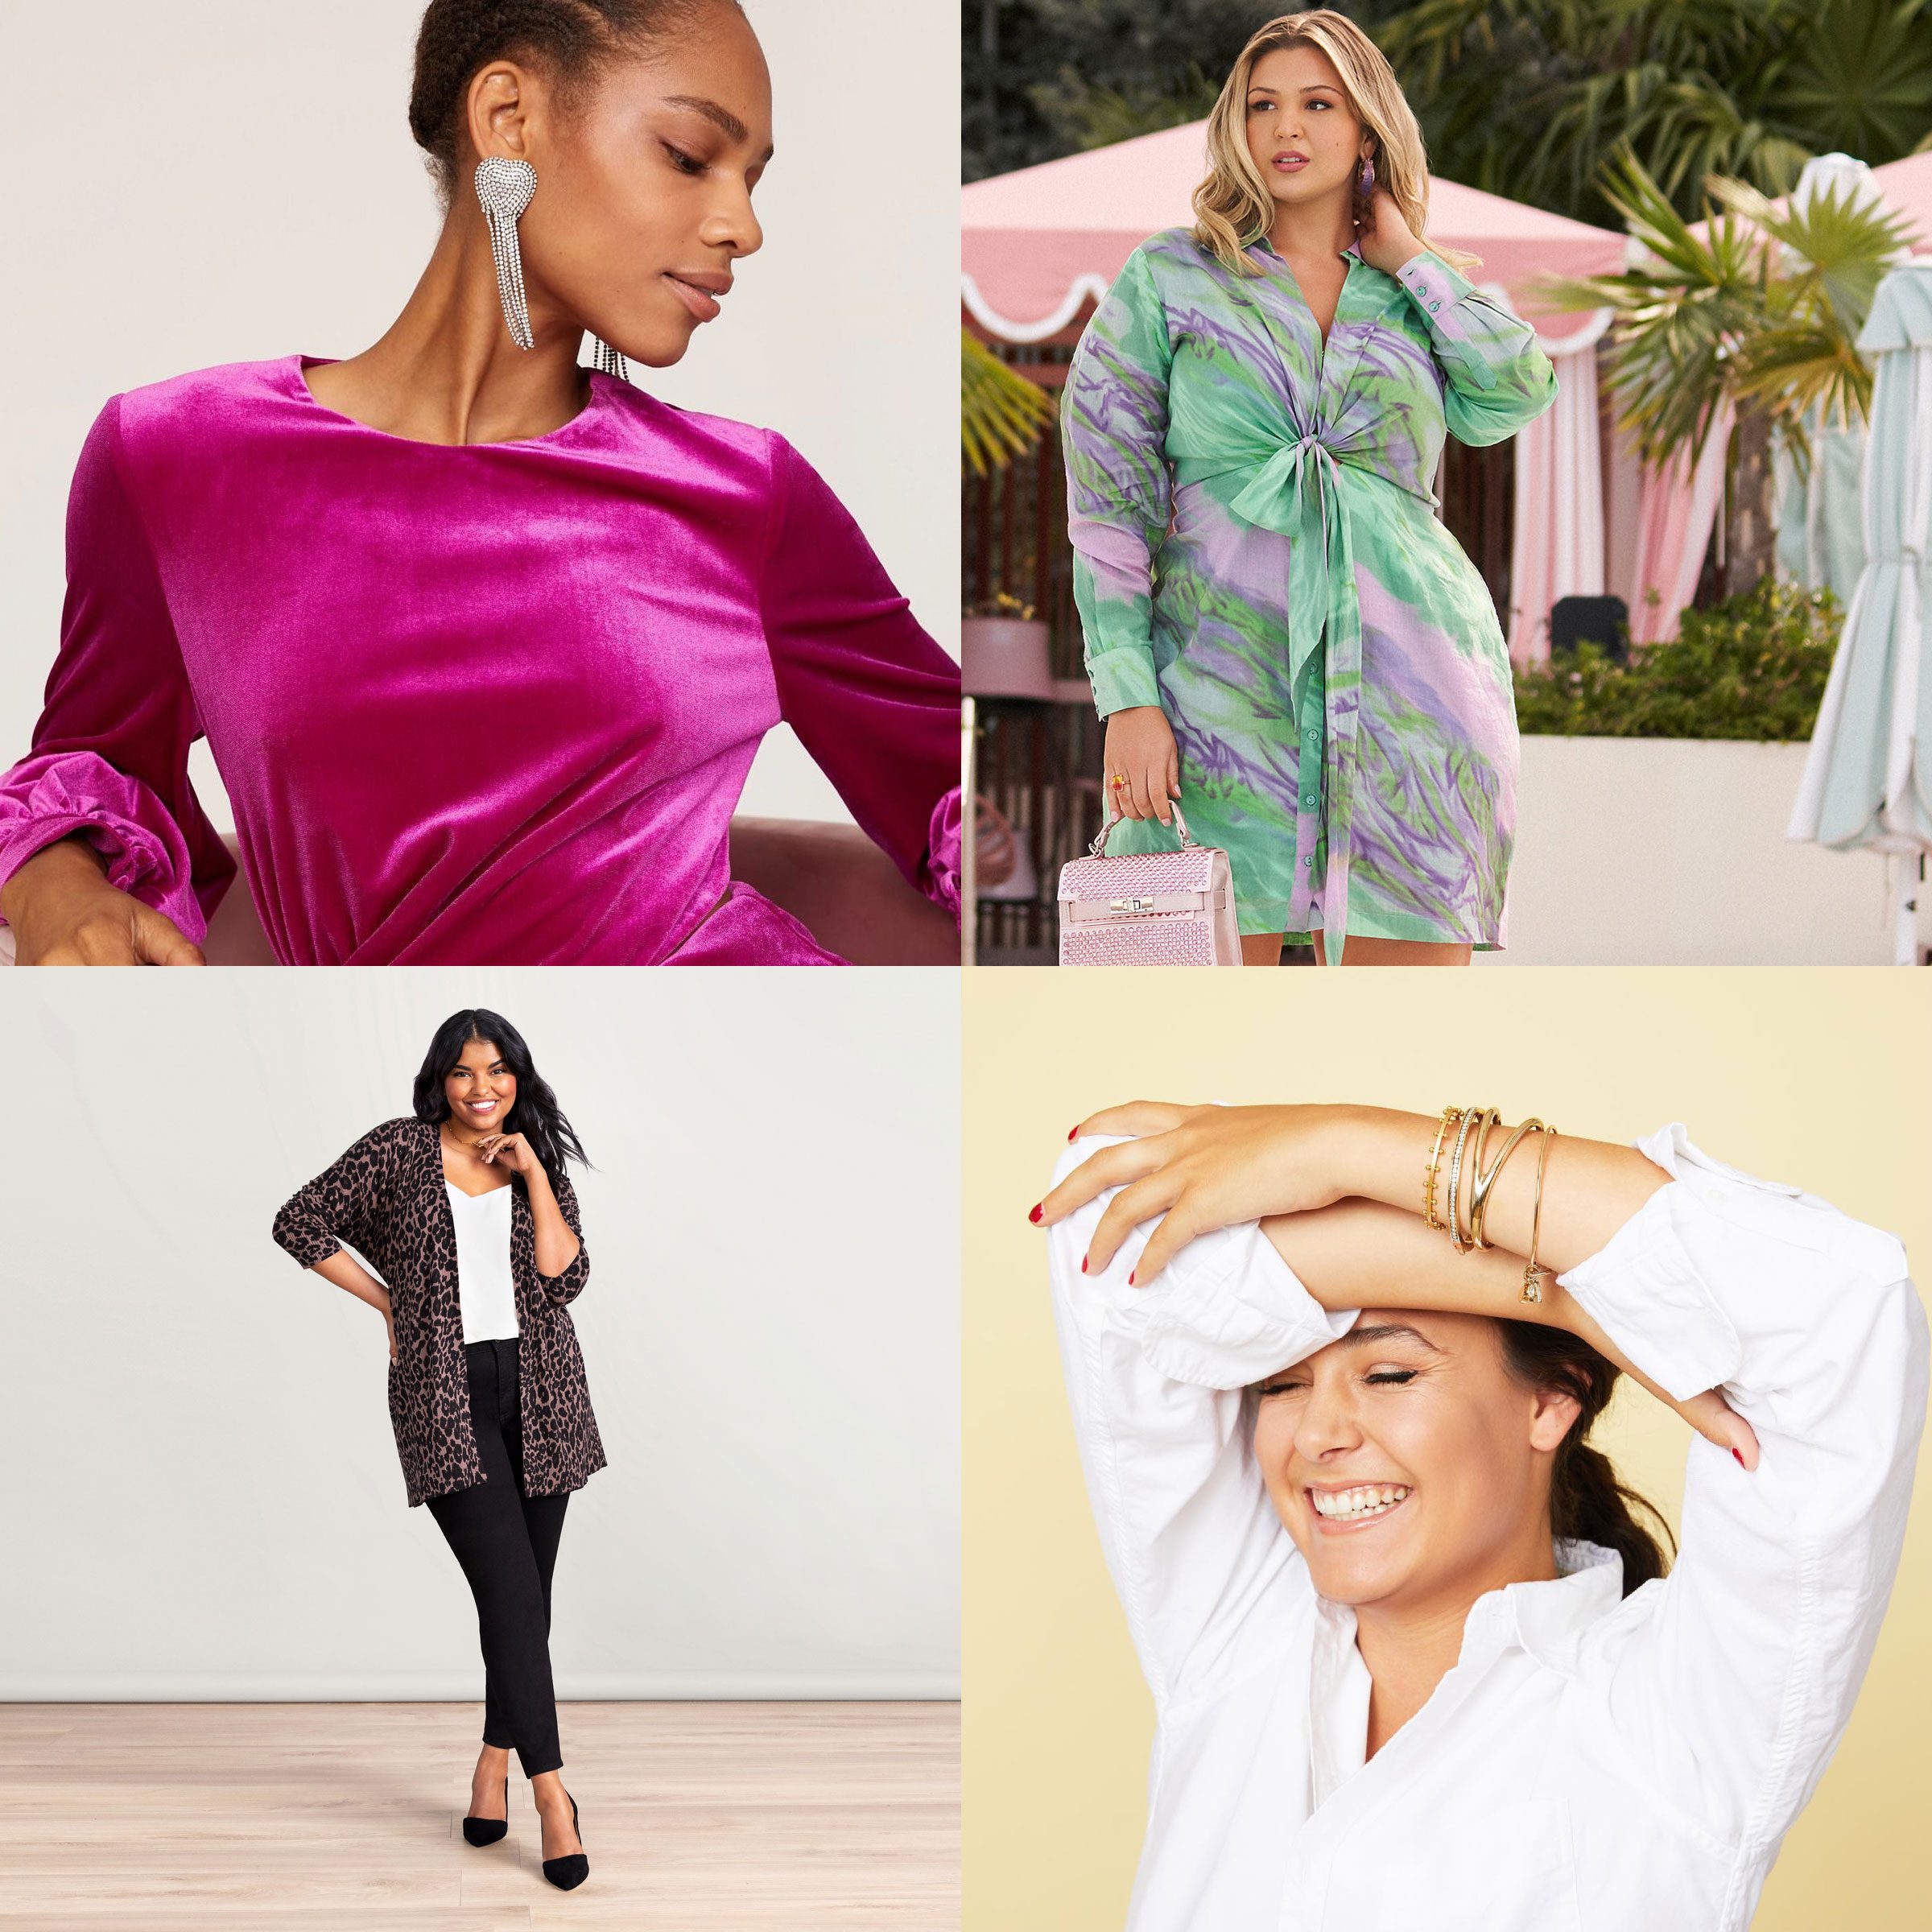 LA Hearts Women's Clothing On Sale Up To 90% Off Retail